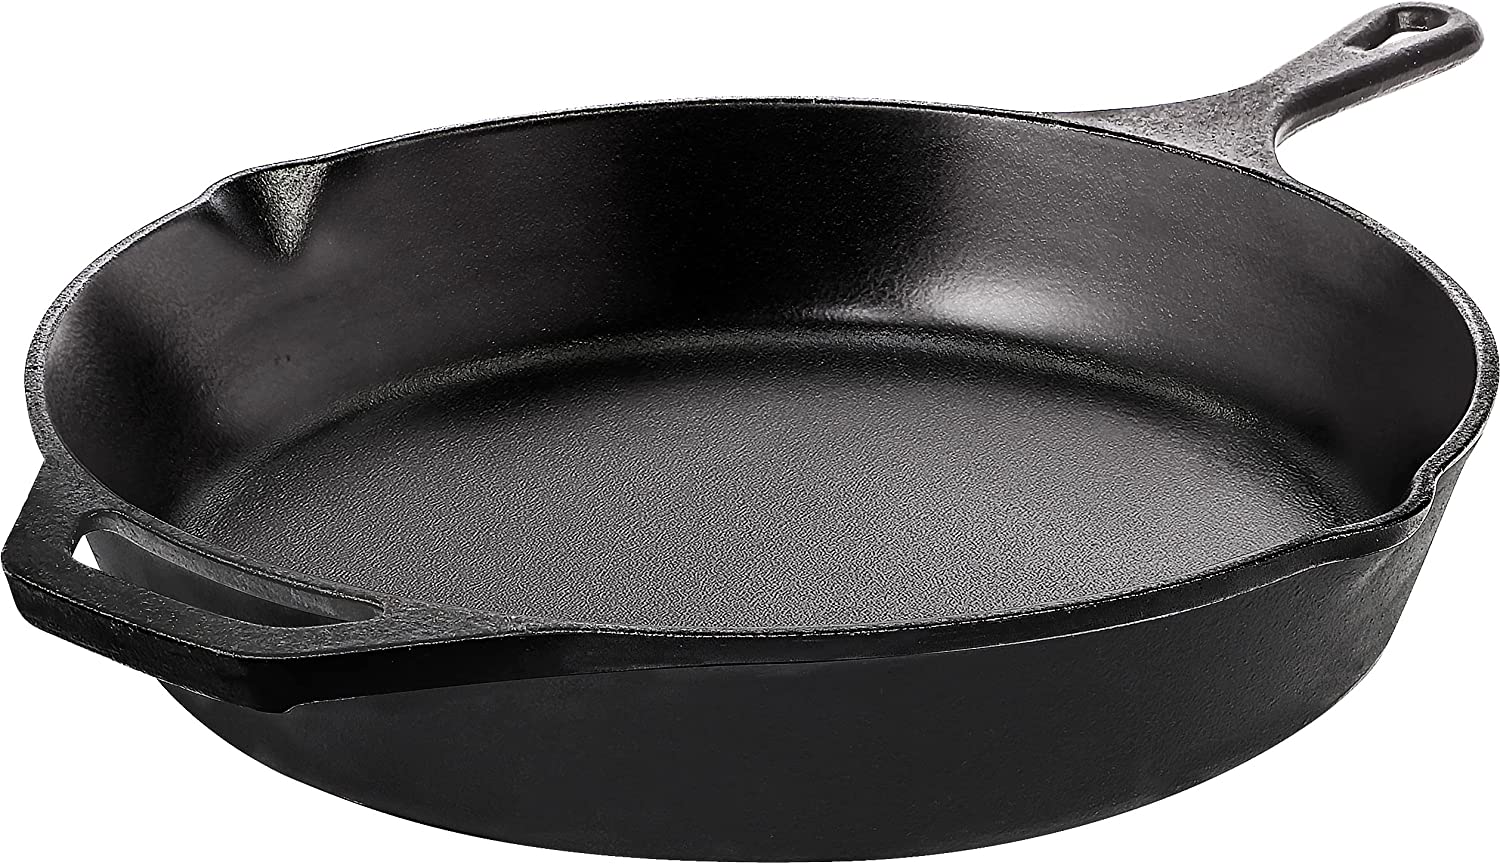 Lodge Seasoned Cast Iron 3 Skillet Bundle. 12 inches and 10.25 inches with  8 inch Set of 3 Cast Iron Frying Pans